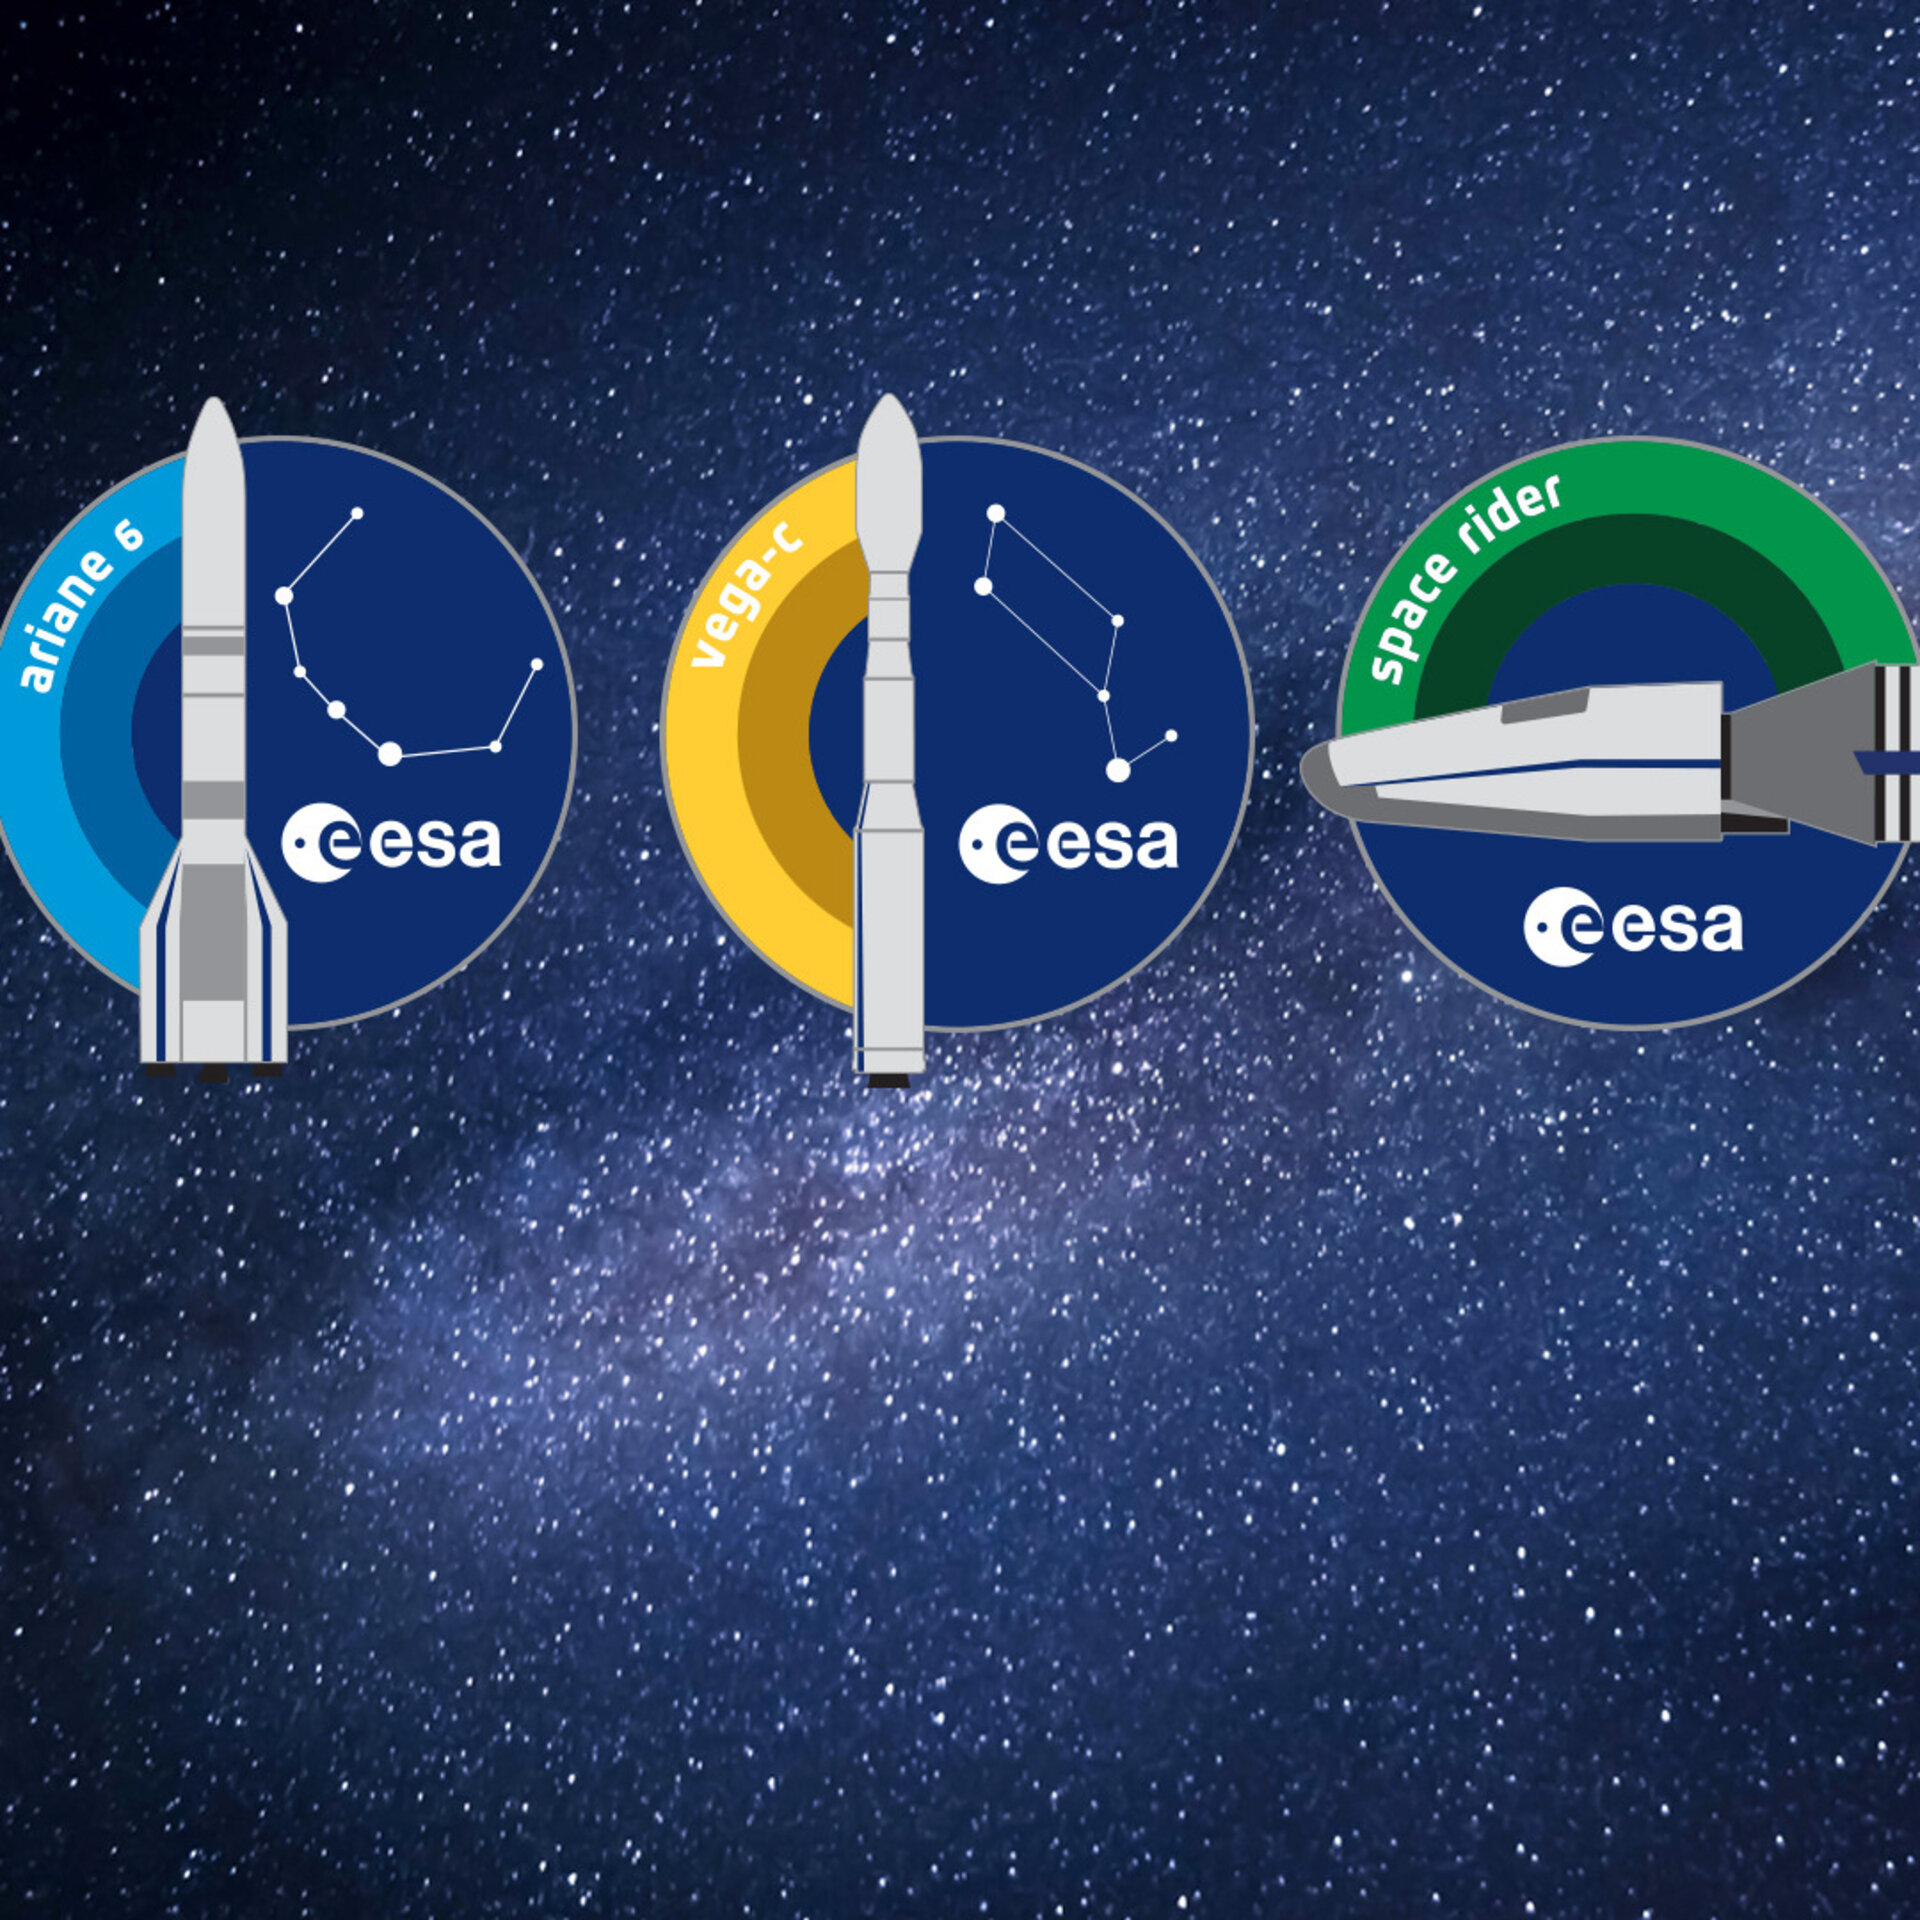 Europe's rockets in the ESAshop